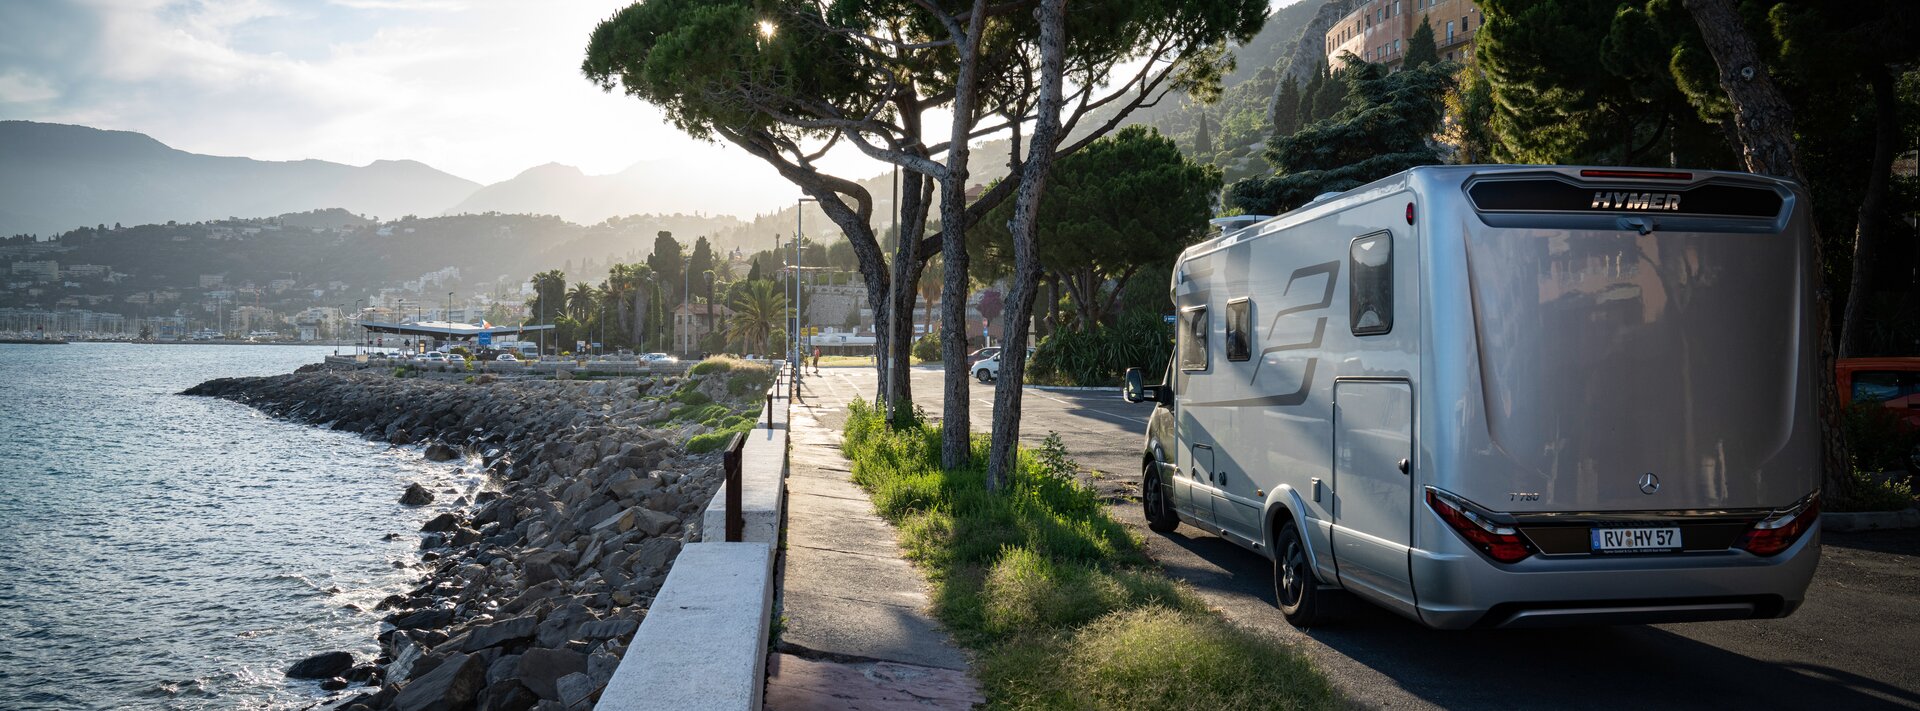 HYMER MasterLine on tree-lined street in a city with a Mediterranean coastal landscape